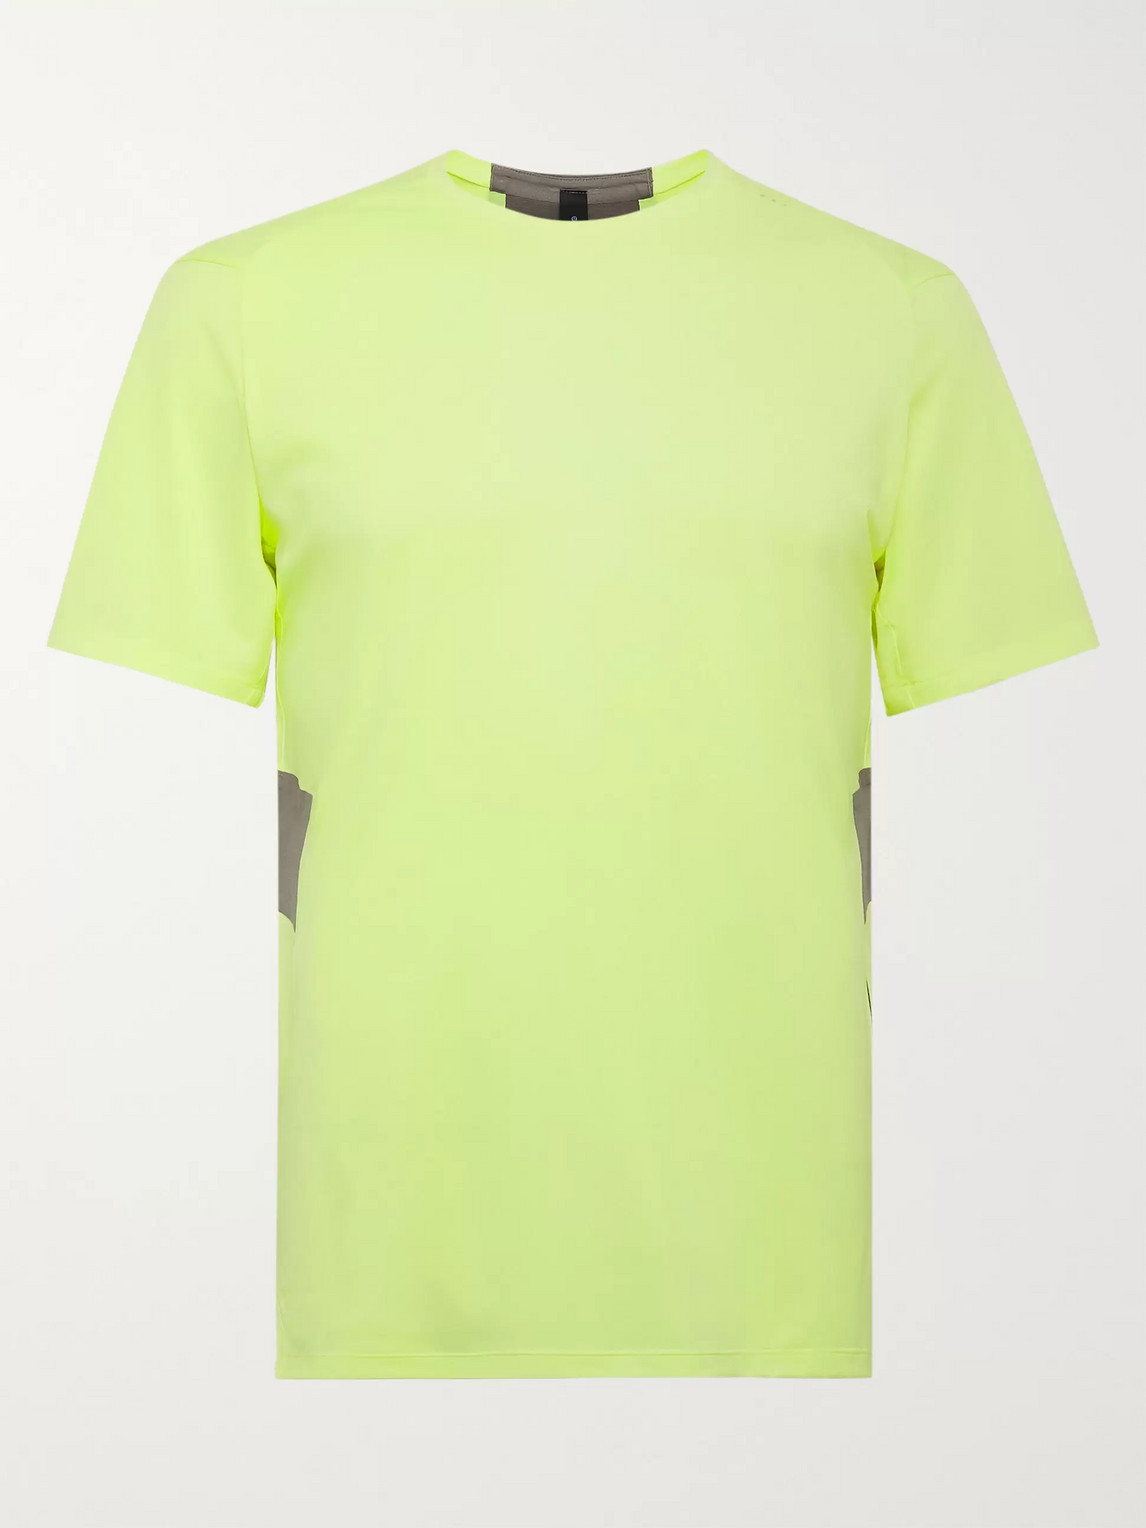 Lululemon Fast And Free Breathe Light Mesh T-shirt In Heathered Solar Yellow/carbon Dust